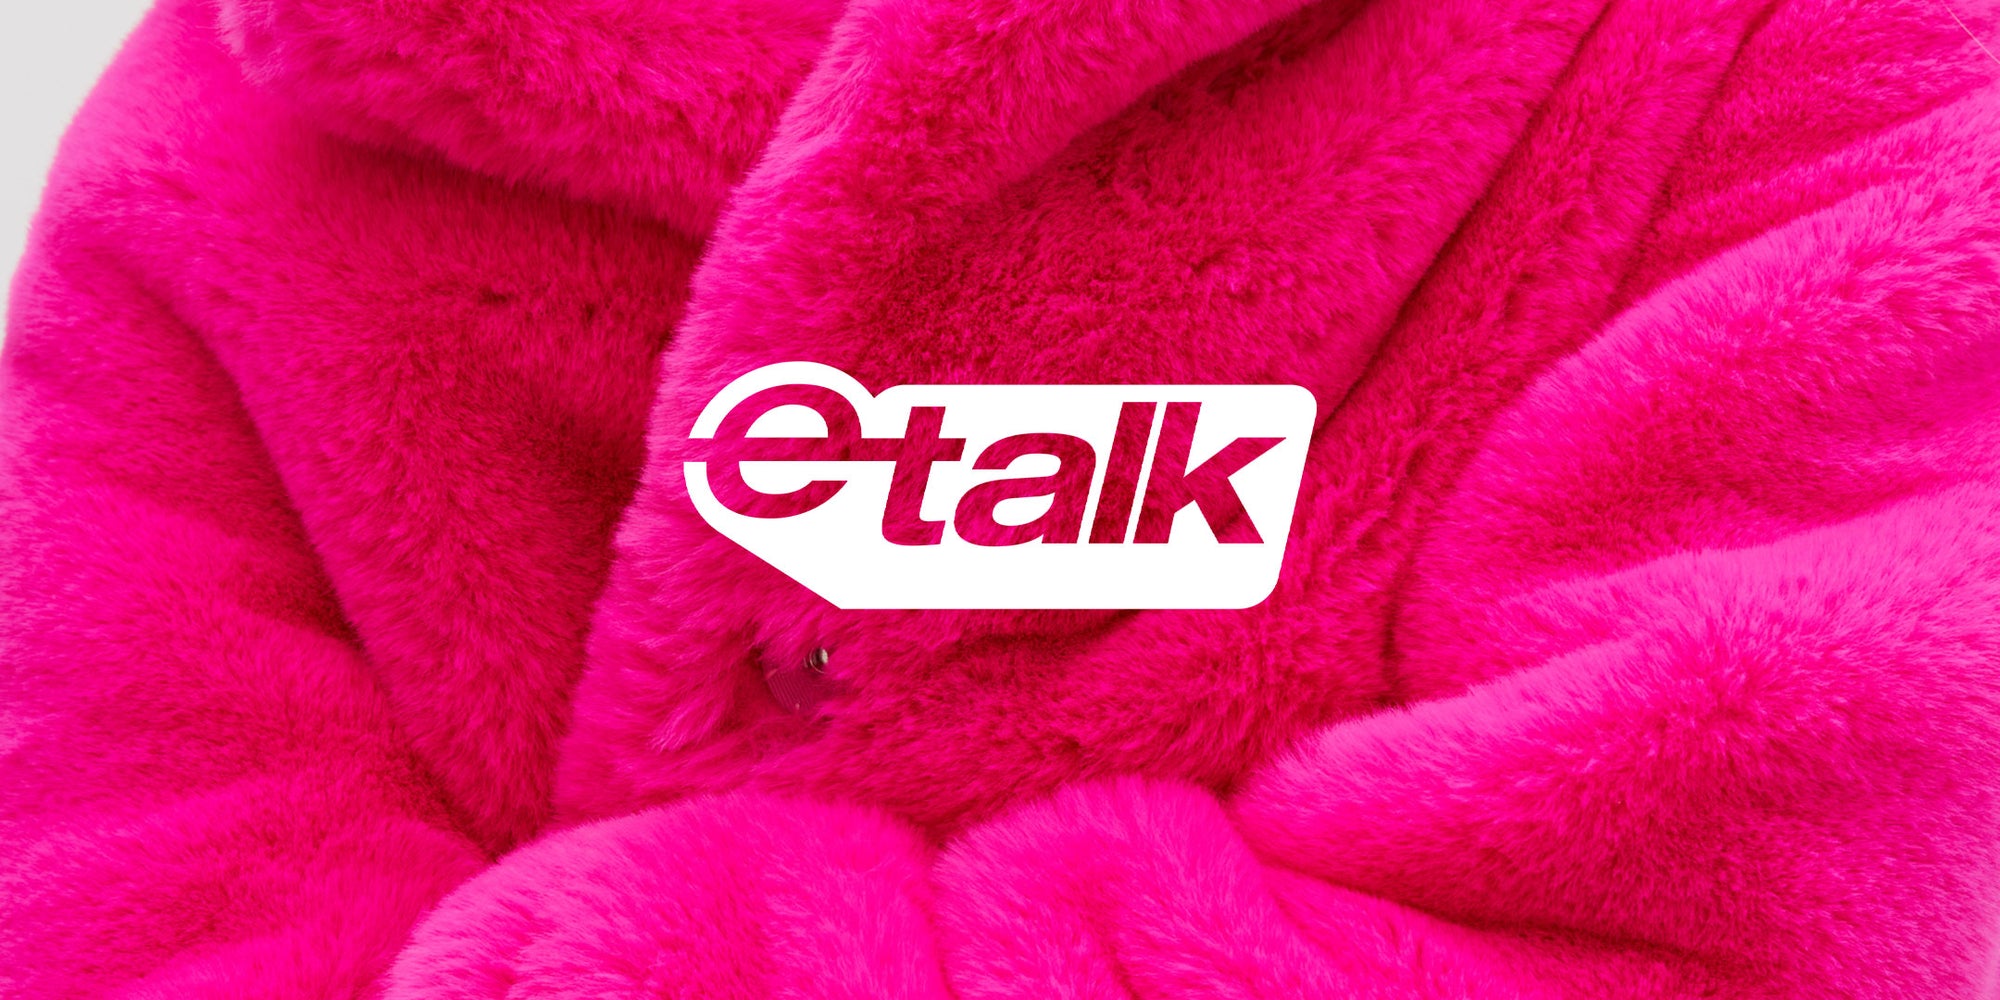 <strong>The Etalk of the town</strong>